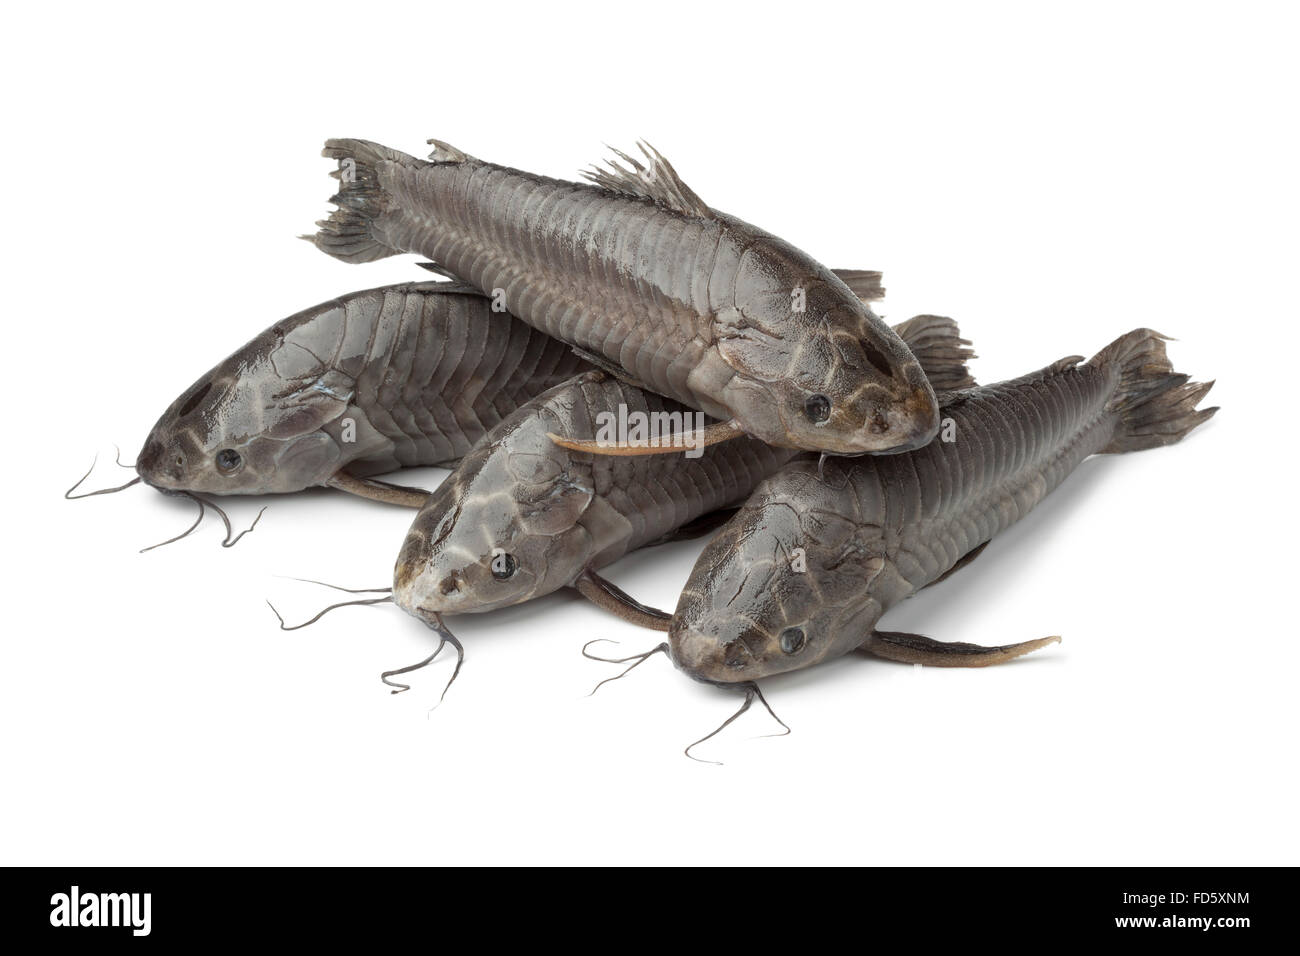 Hoplosternum littorale, swamp fishes, on white background Stock Photo